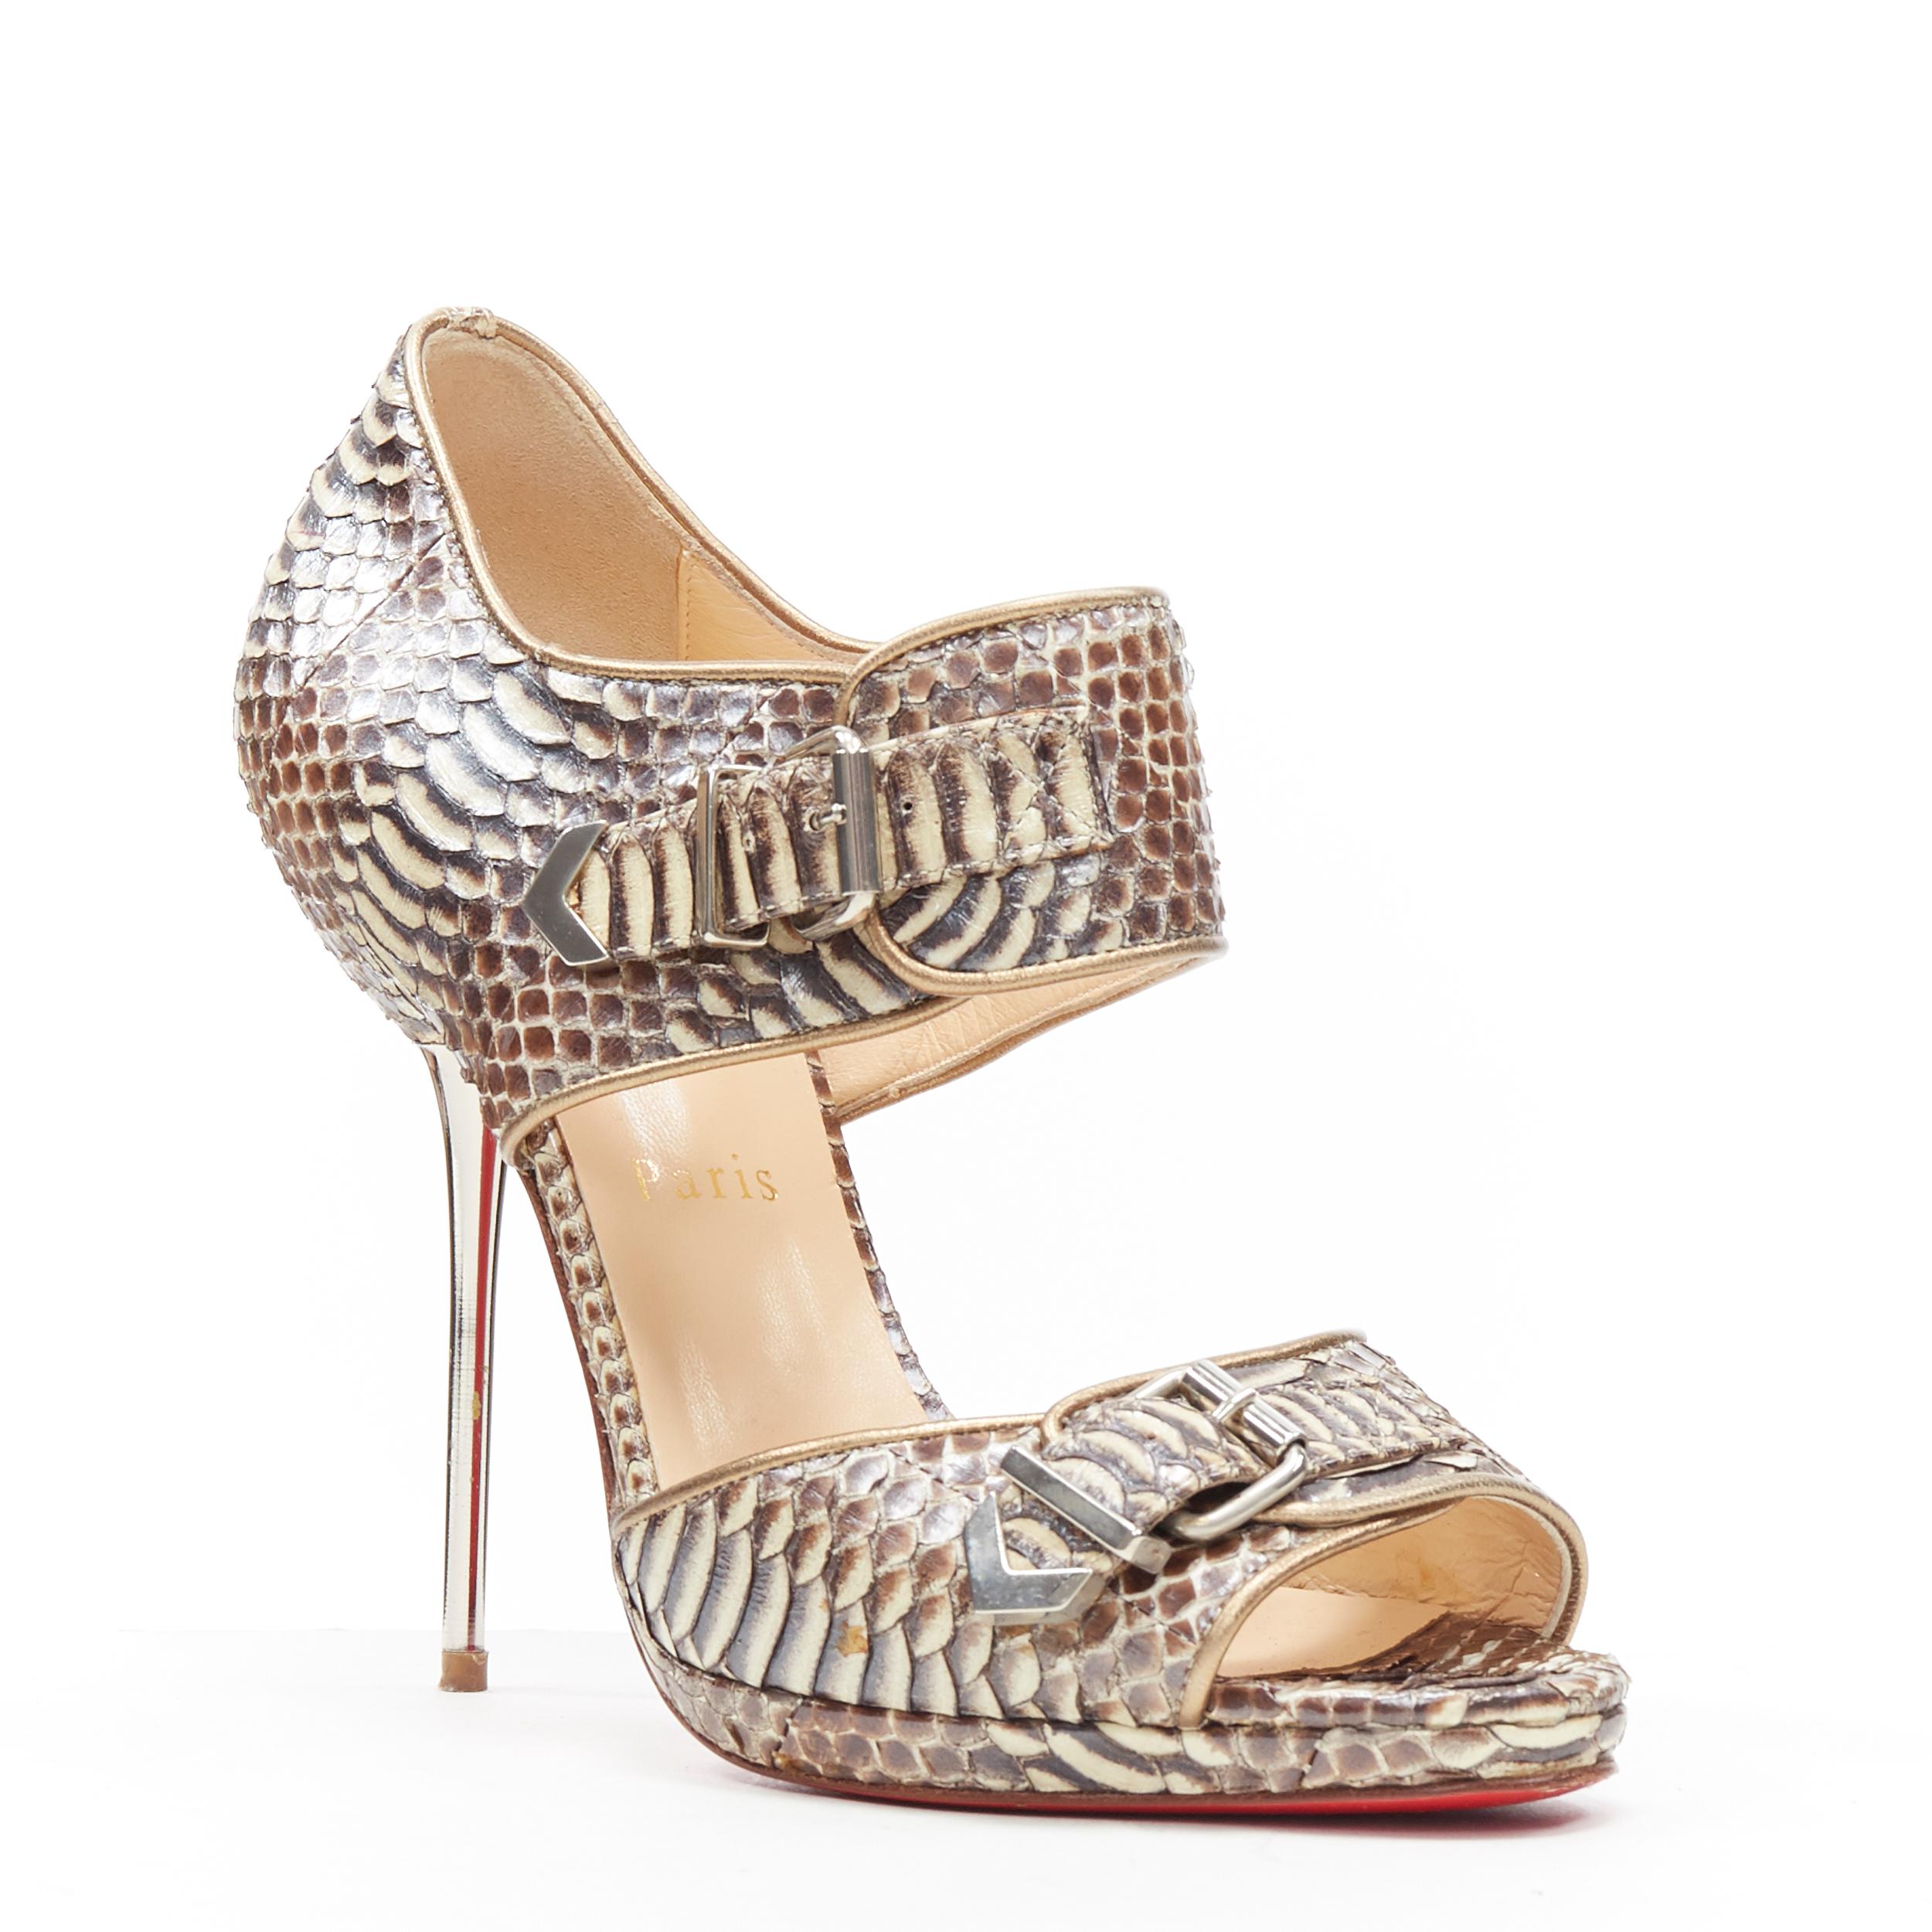 CHRISTIAN LOUBOUTIN scaled leather buckle strap metal pin heel sandals EU37
Brand: Christian Louboutin
Designer: Christian Louboutin
Model Name / Style: Pin heel sandals
Material: Leather
Color: Beige
Pattern: Snakeskin
Closure: Ankle strap
Extra